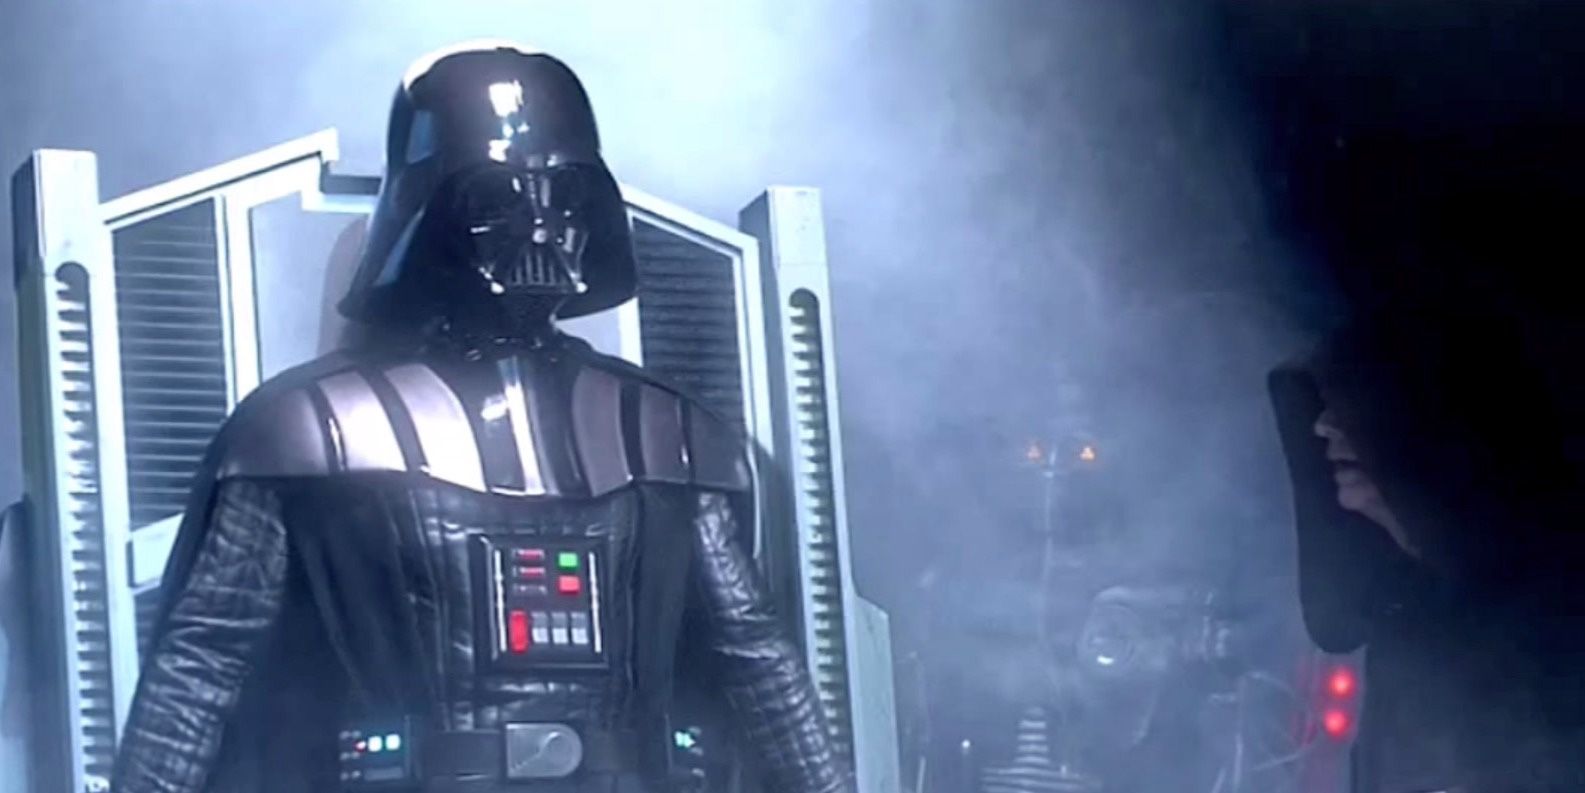 Darth Vader in Star Wars revenge of the Sith